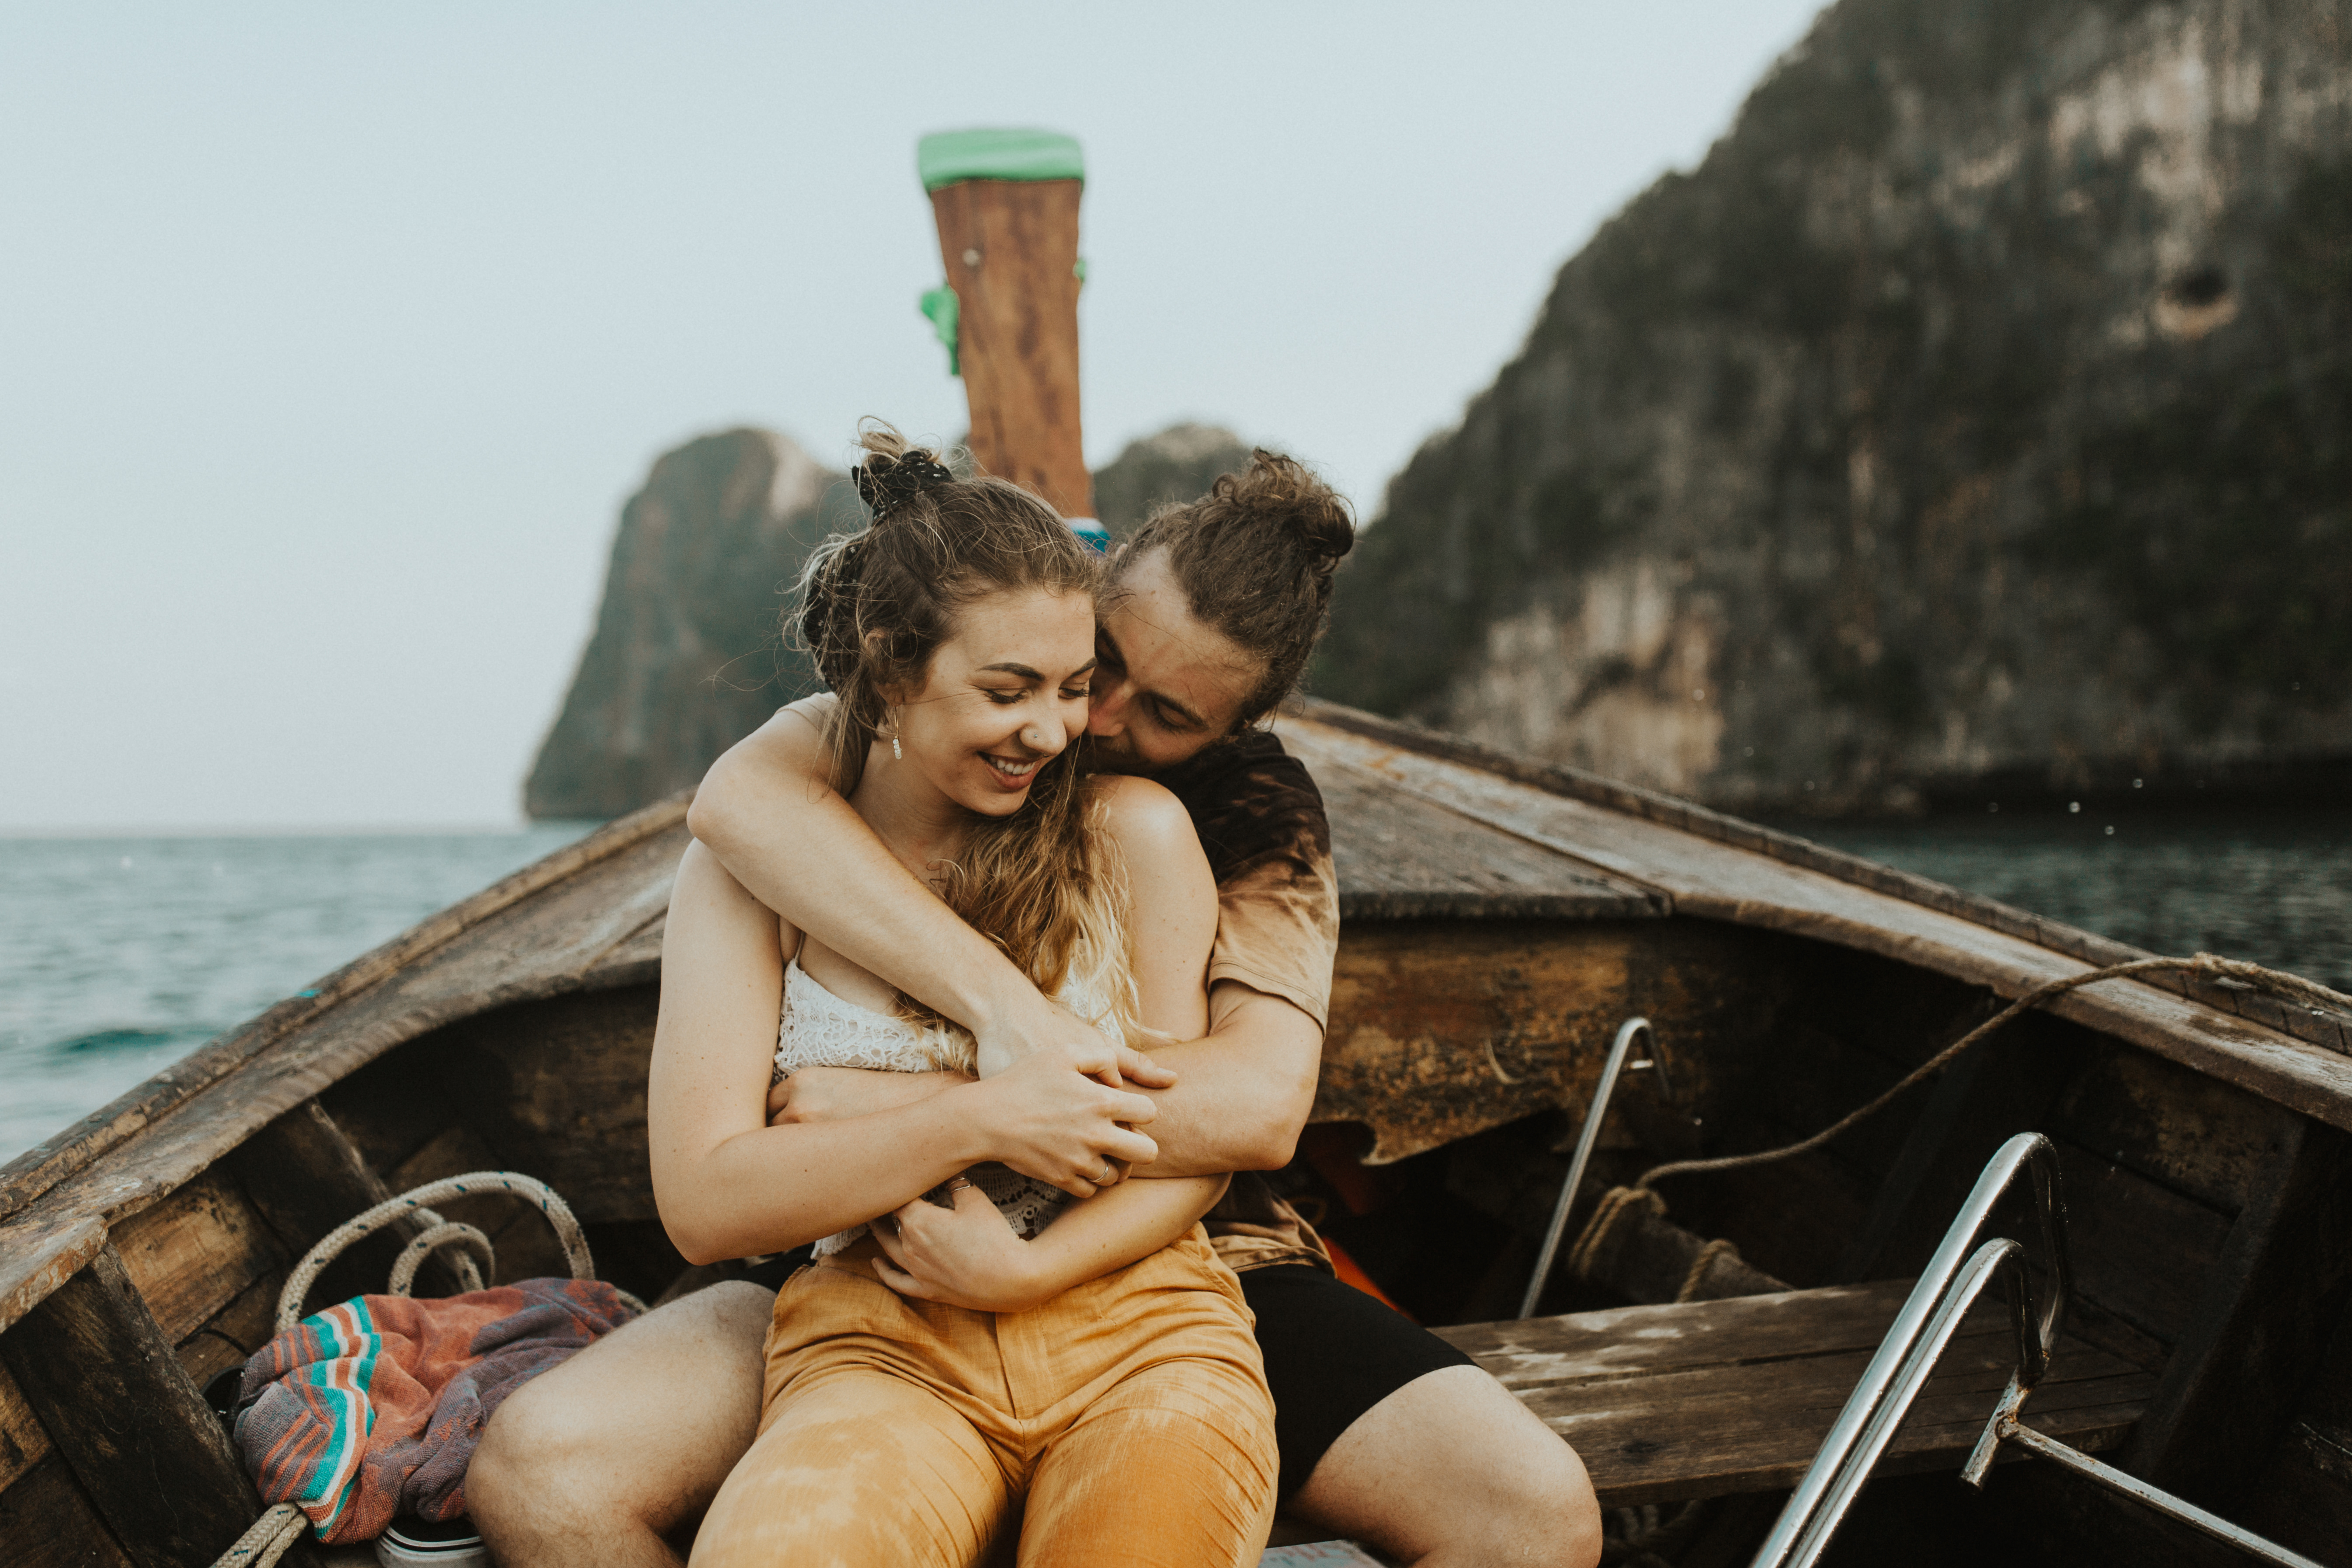 Thailand Adventure shoot at Phi Phi Islands! This session with Jade + Kai started with an epic boat tour and ended with them running around on the island beach!